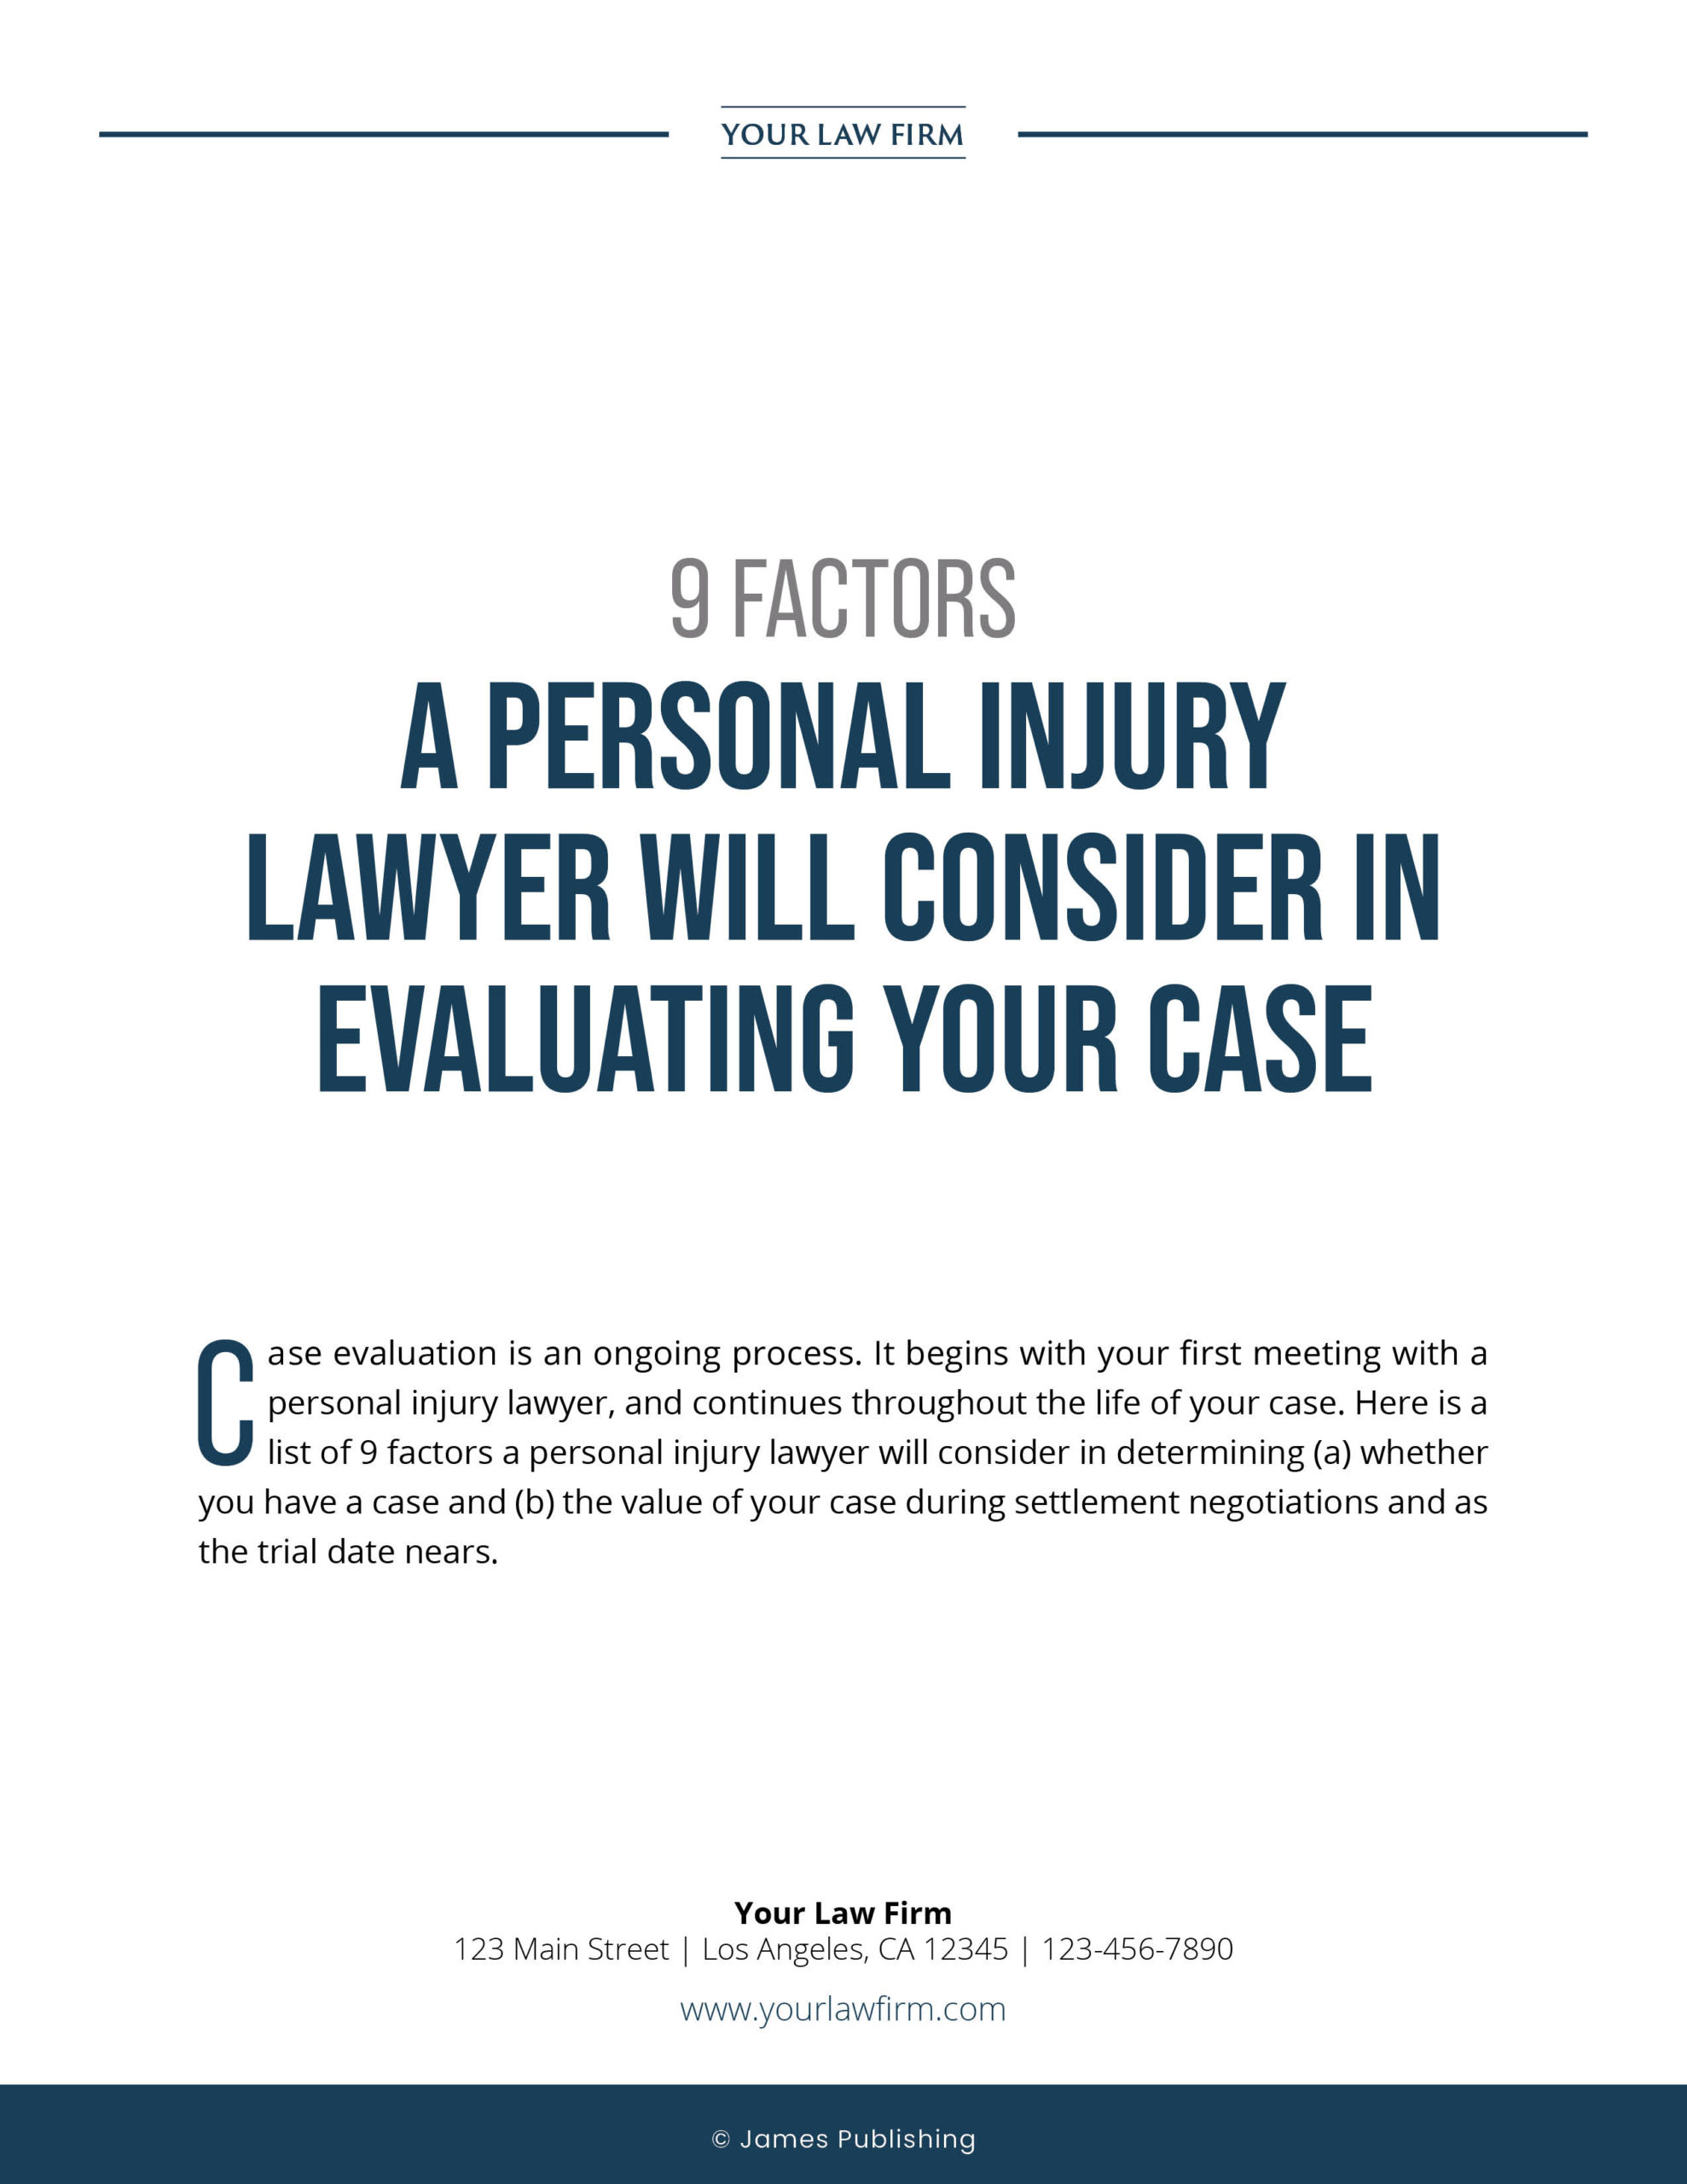 PI-09 9 Factors a Personal Injury Lawyer Will Consider in Evaluating Your Case